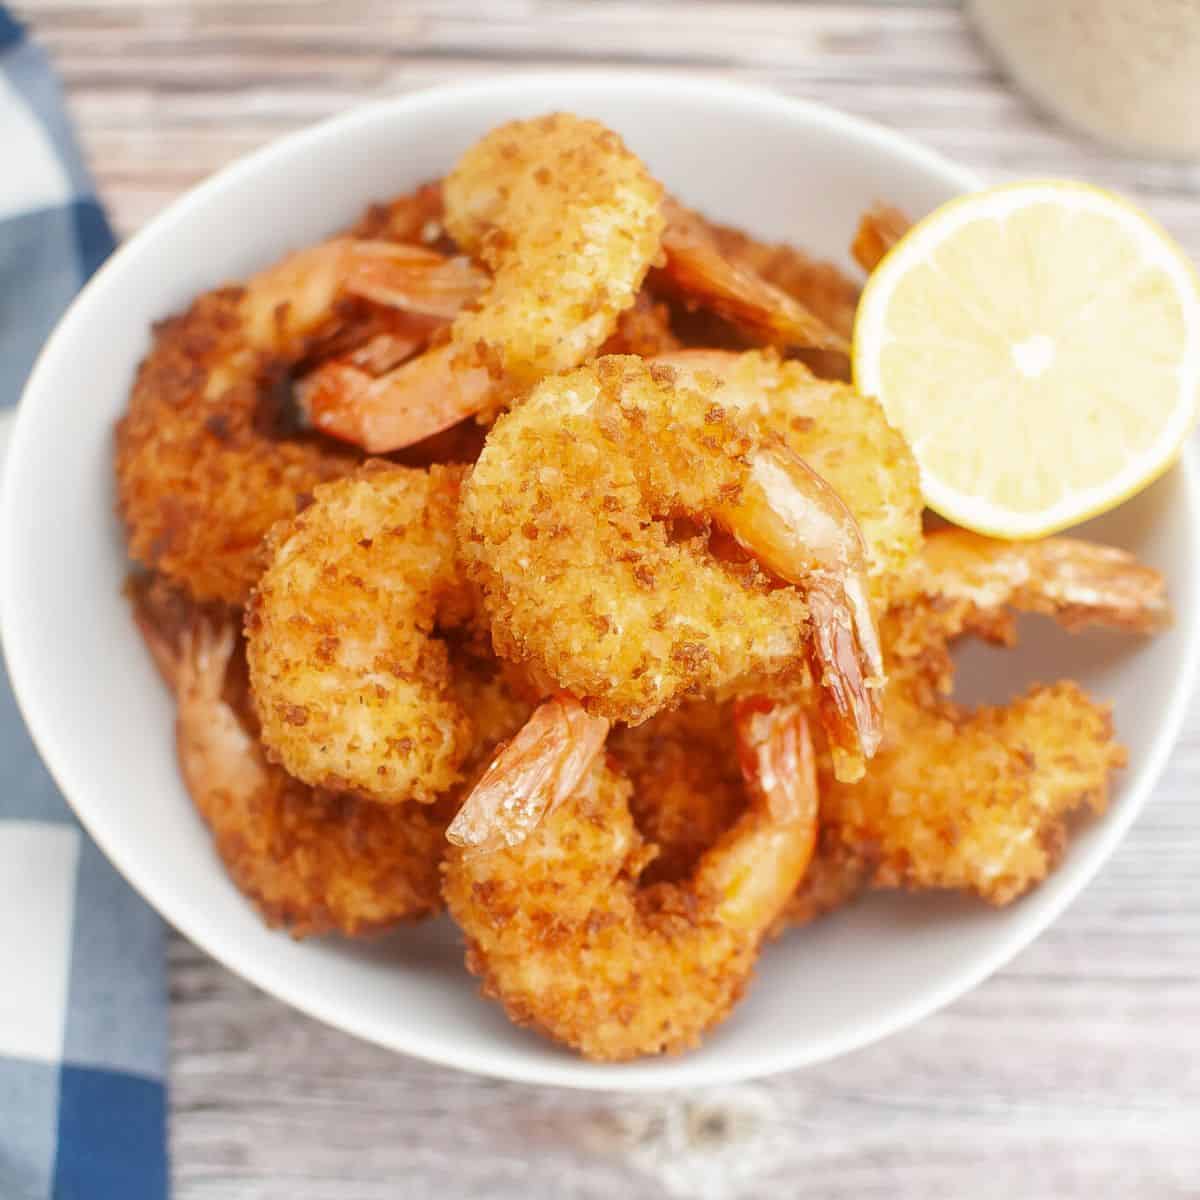 Fried shrimp with panko bread crumbs in a bowl with lemon wedge.